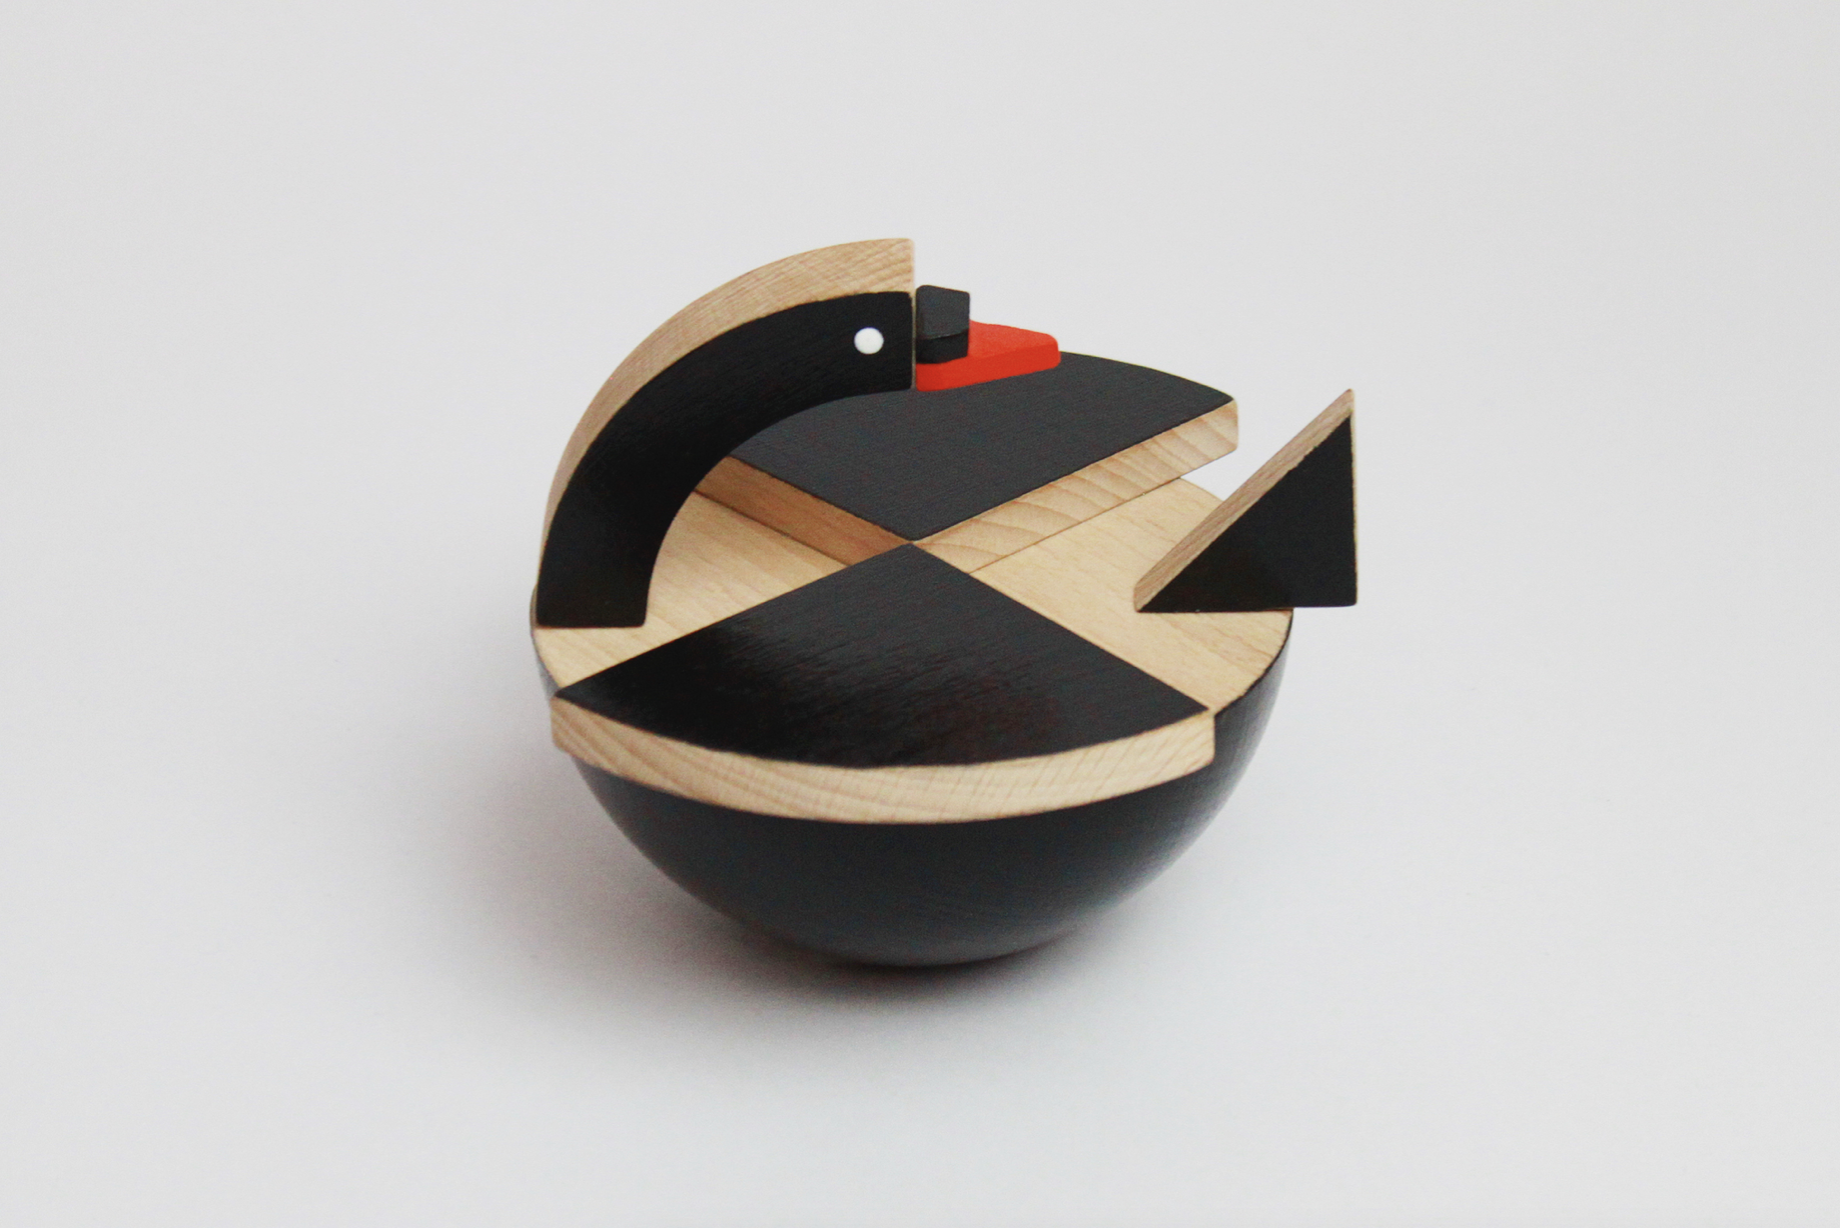 Kutulu Bula Movable Wooden Toy in Black